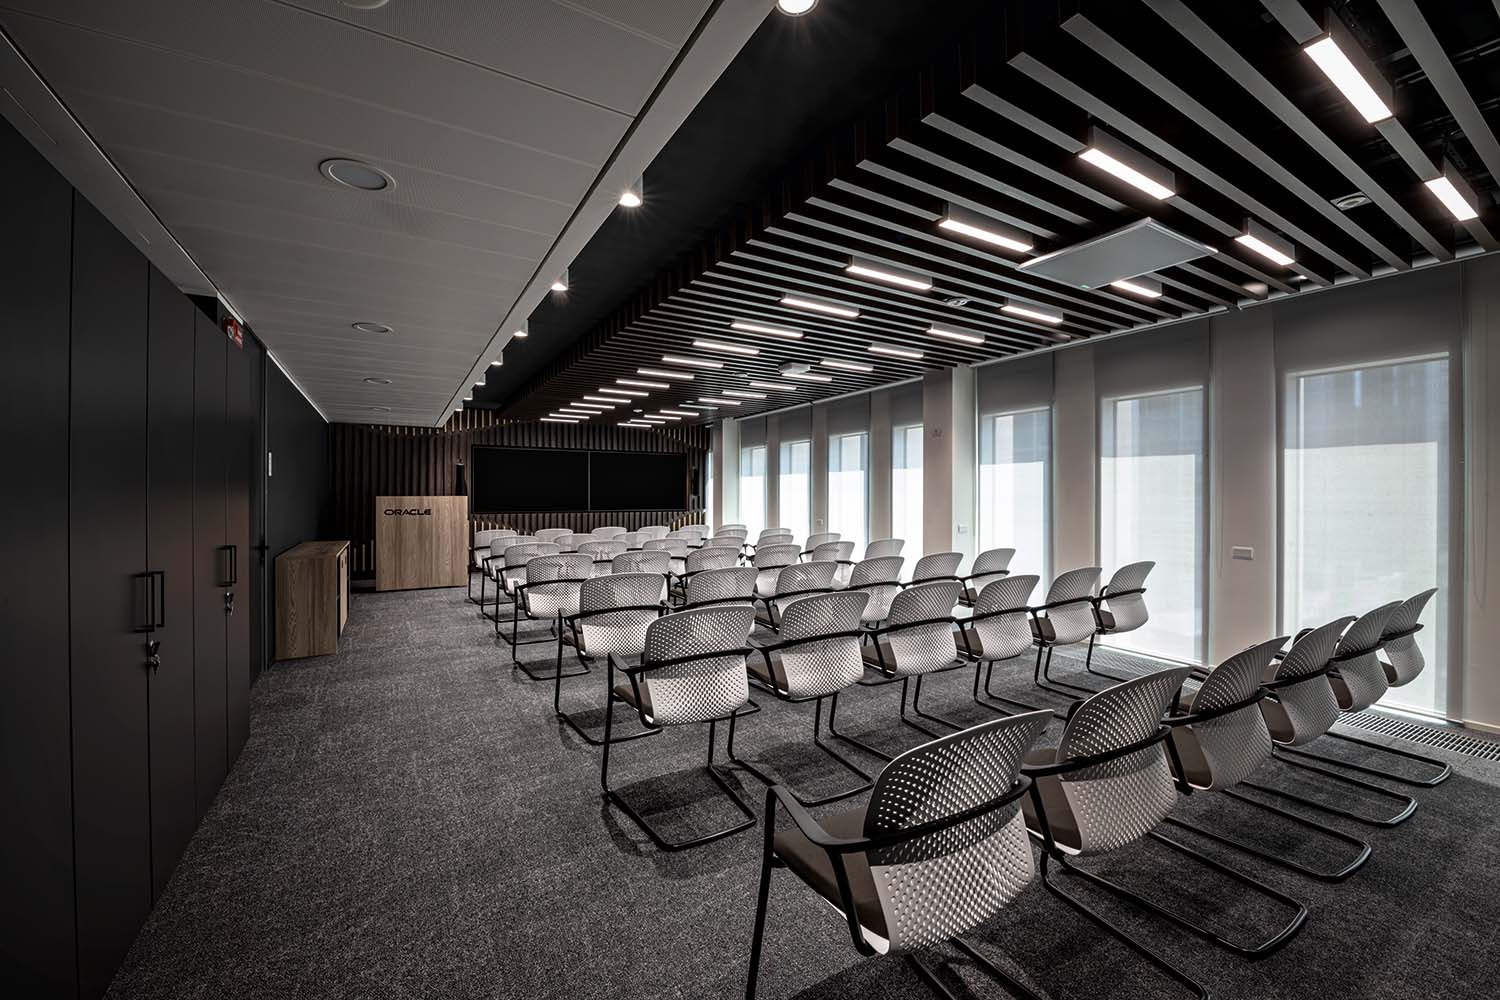 Oracle Headquarters | © Dario e Carlo Tettamanzi, courtesy of Lombardini 22 | In addition to the Alda Merini auditorium, there are additional rooms dedicated to meetings and presentations on each floor.